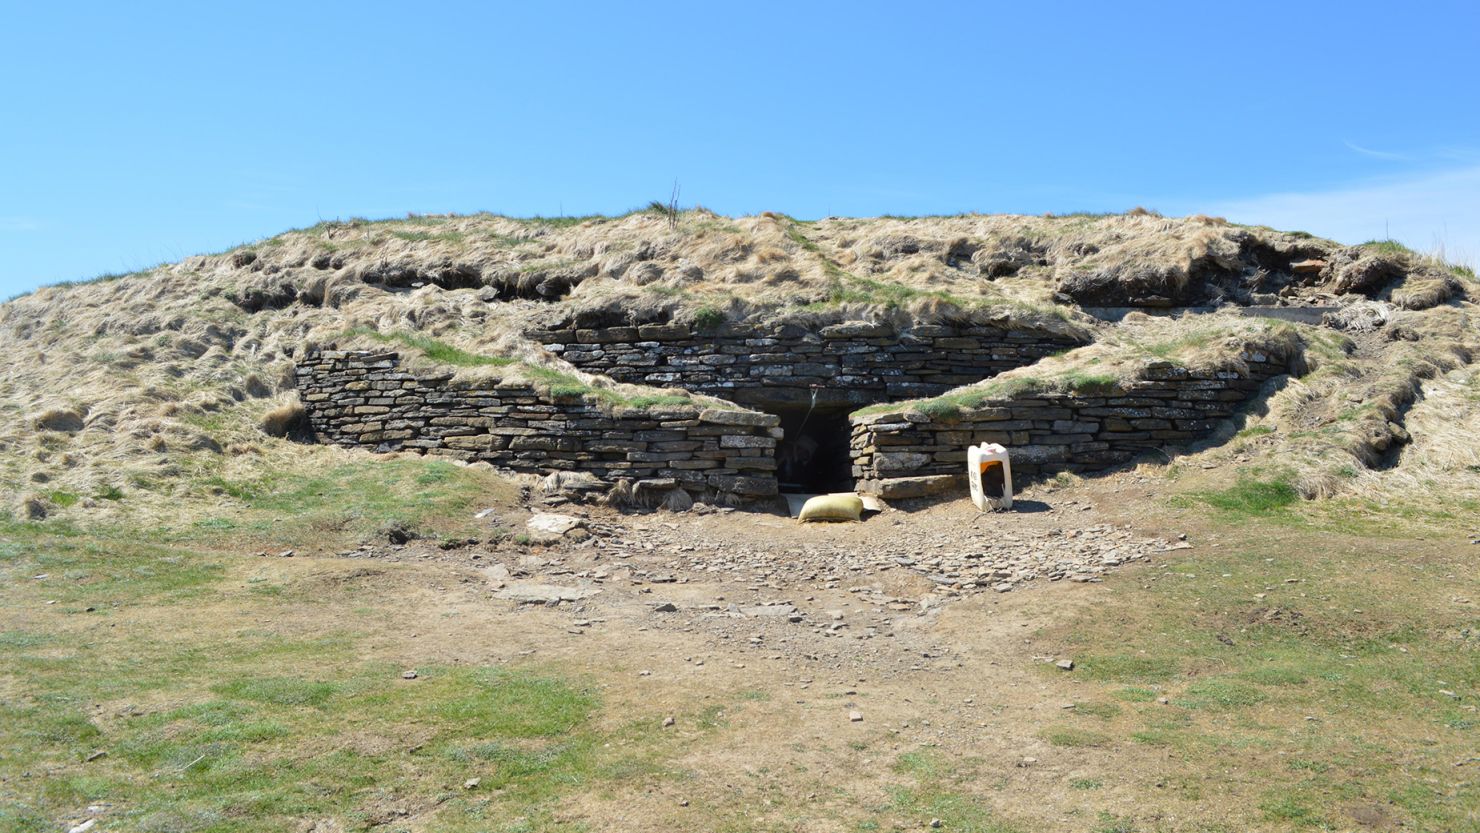 Some of the remains used in the study were found at Isbister Chambered Cairn, a 5,000-year-old tomb, located in South Ronaldsay, Orkney, Scotland.